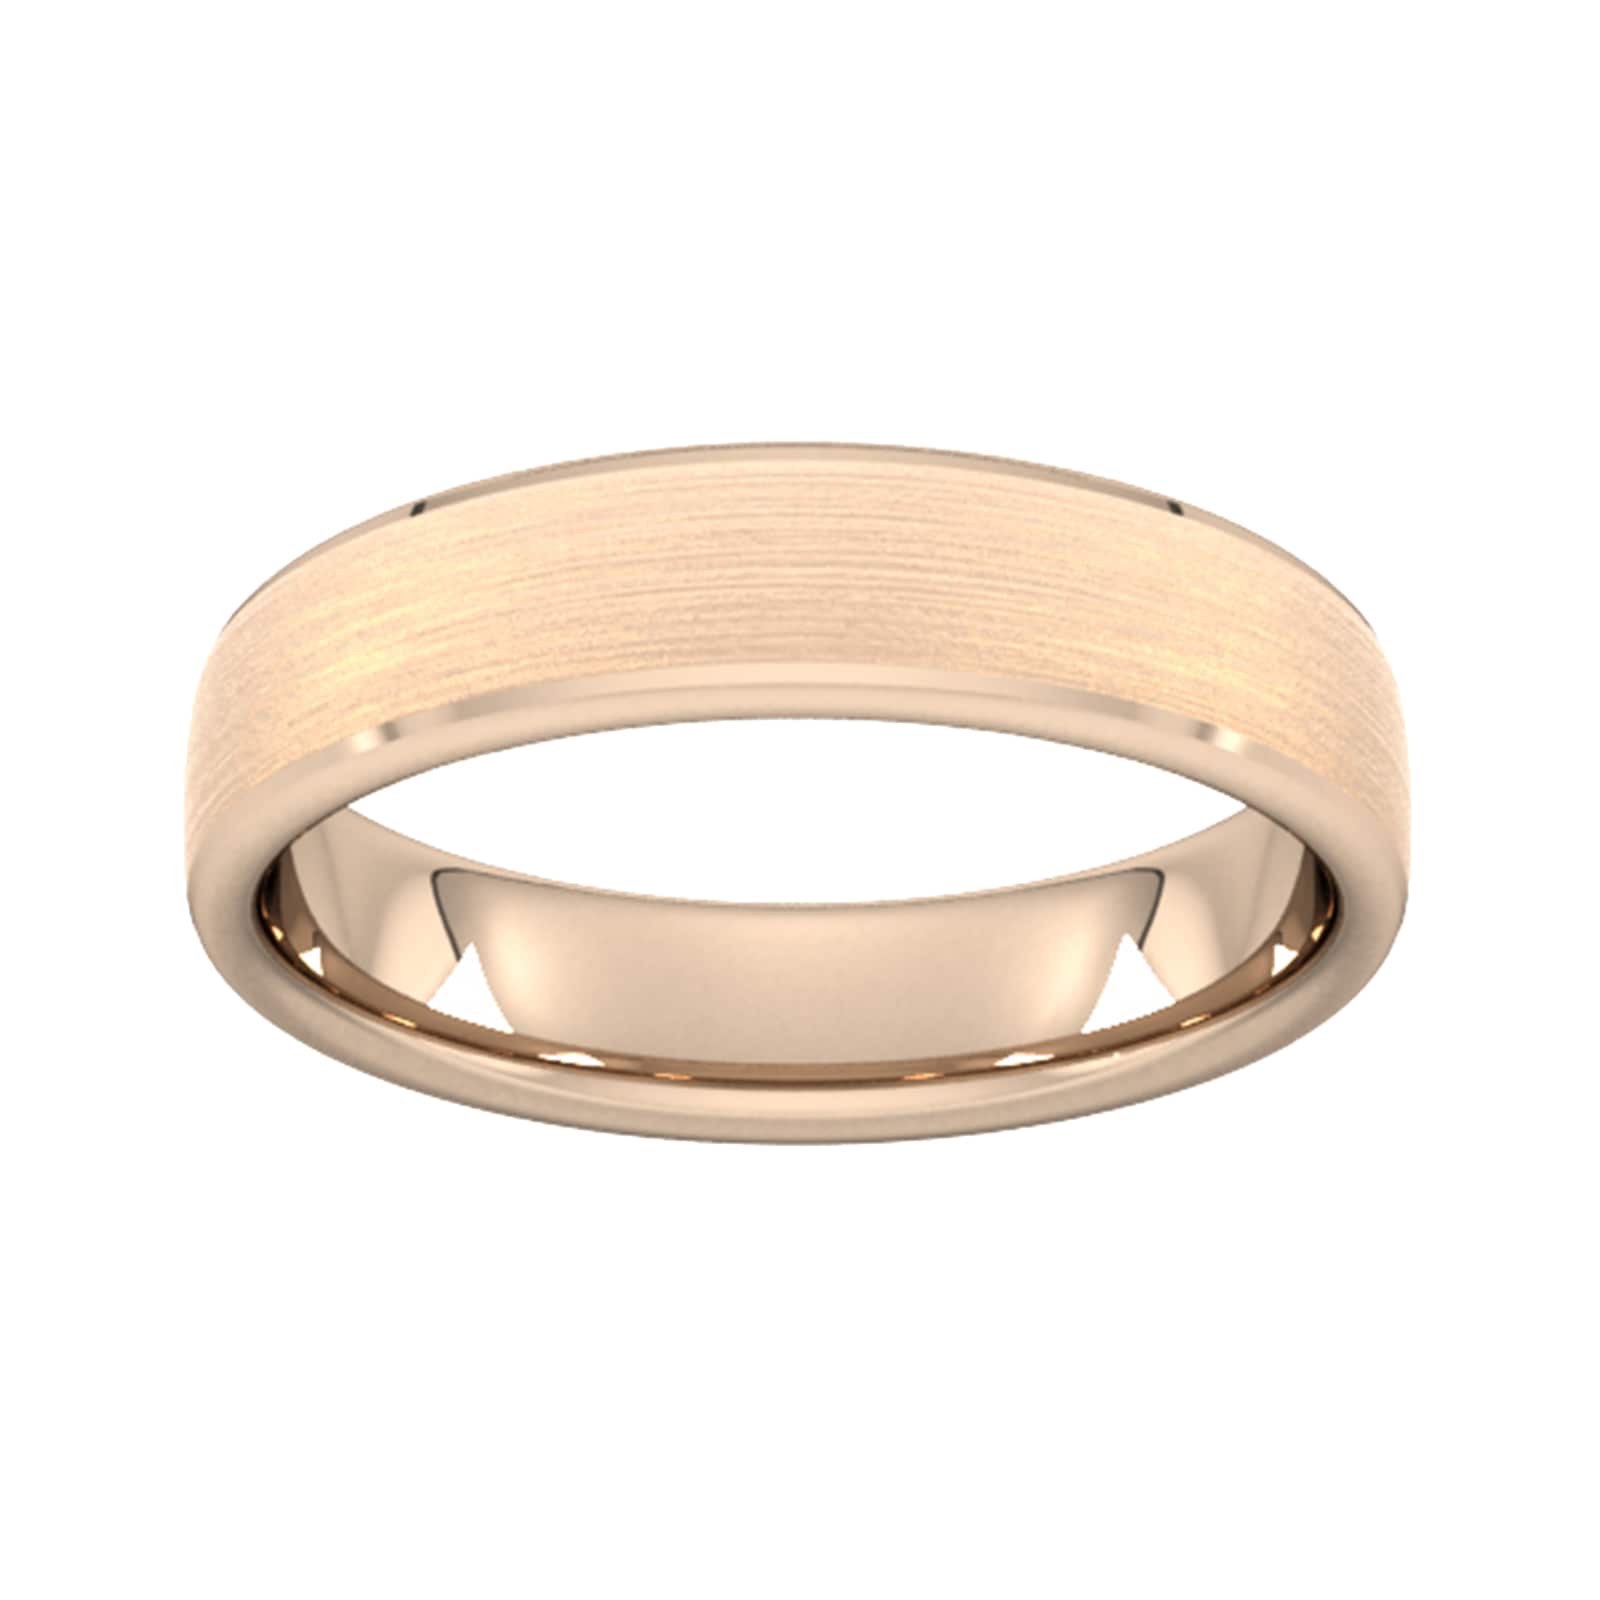 5mm D Shape Standard Polished Chamfered Edges With Matt Centre Wedding Ring In 18 Carat Rose Gold - Ring Size Q